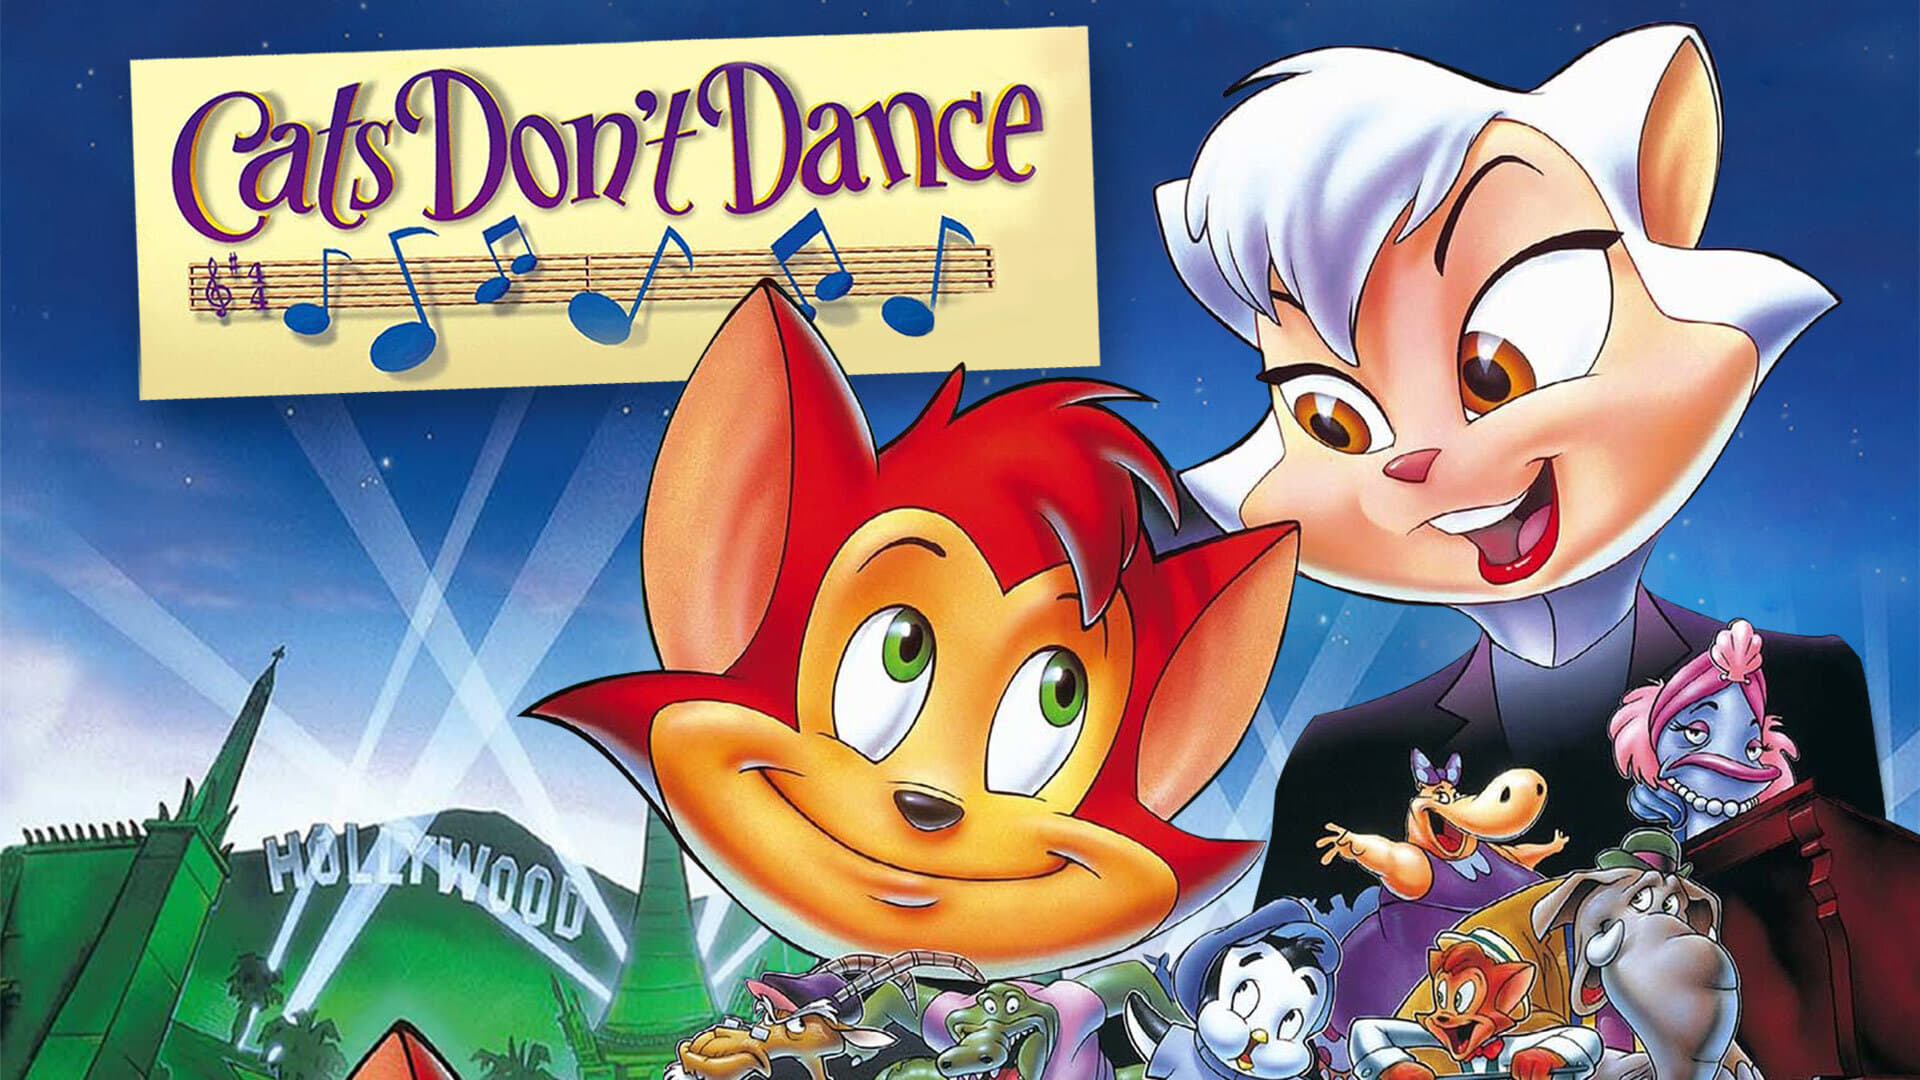 Cats Don't Dance (1997): An animated film, Comedy, A talented cat dreaming of Hollywood, Cartoon. 1920x1080 Full HD Wallpaper.